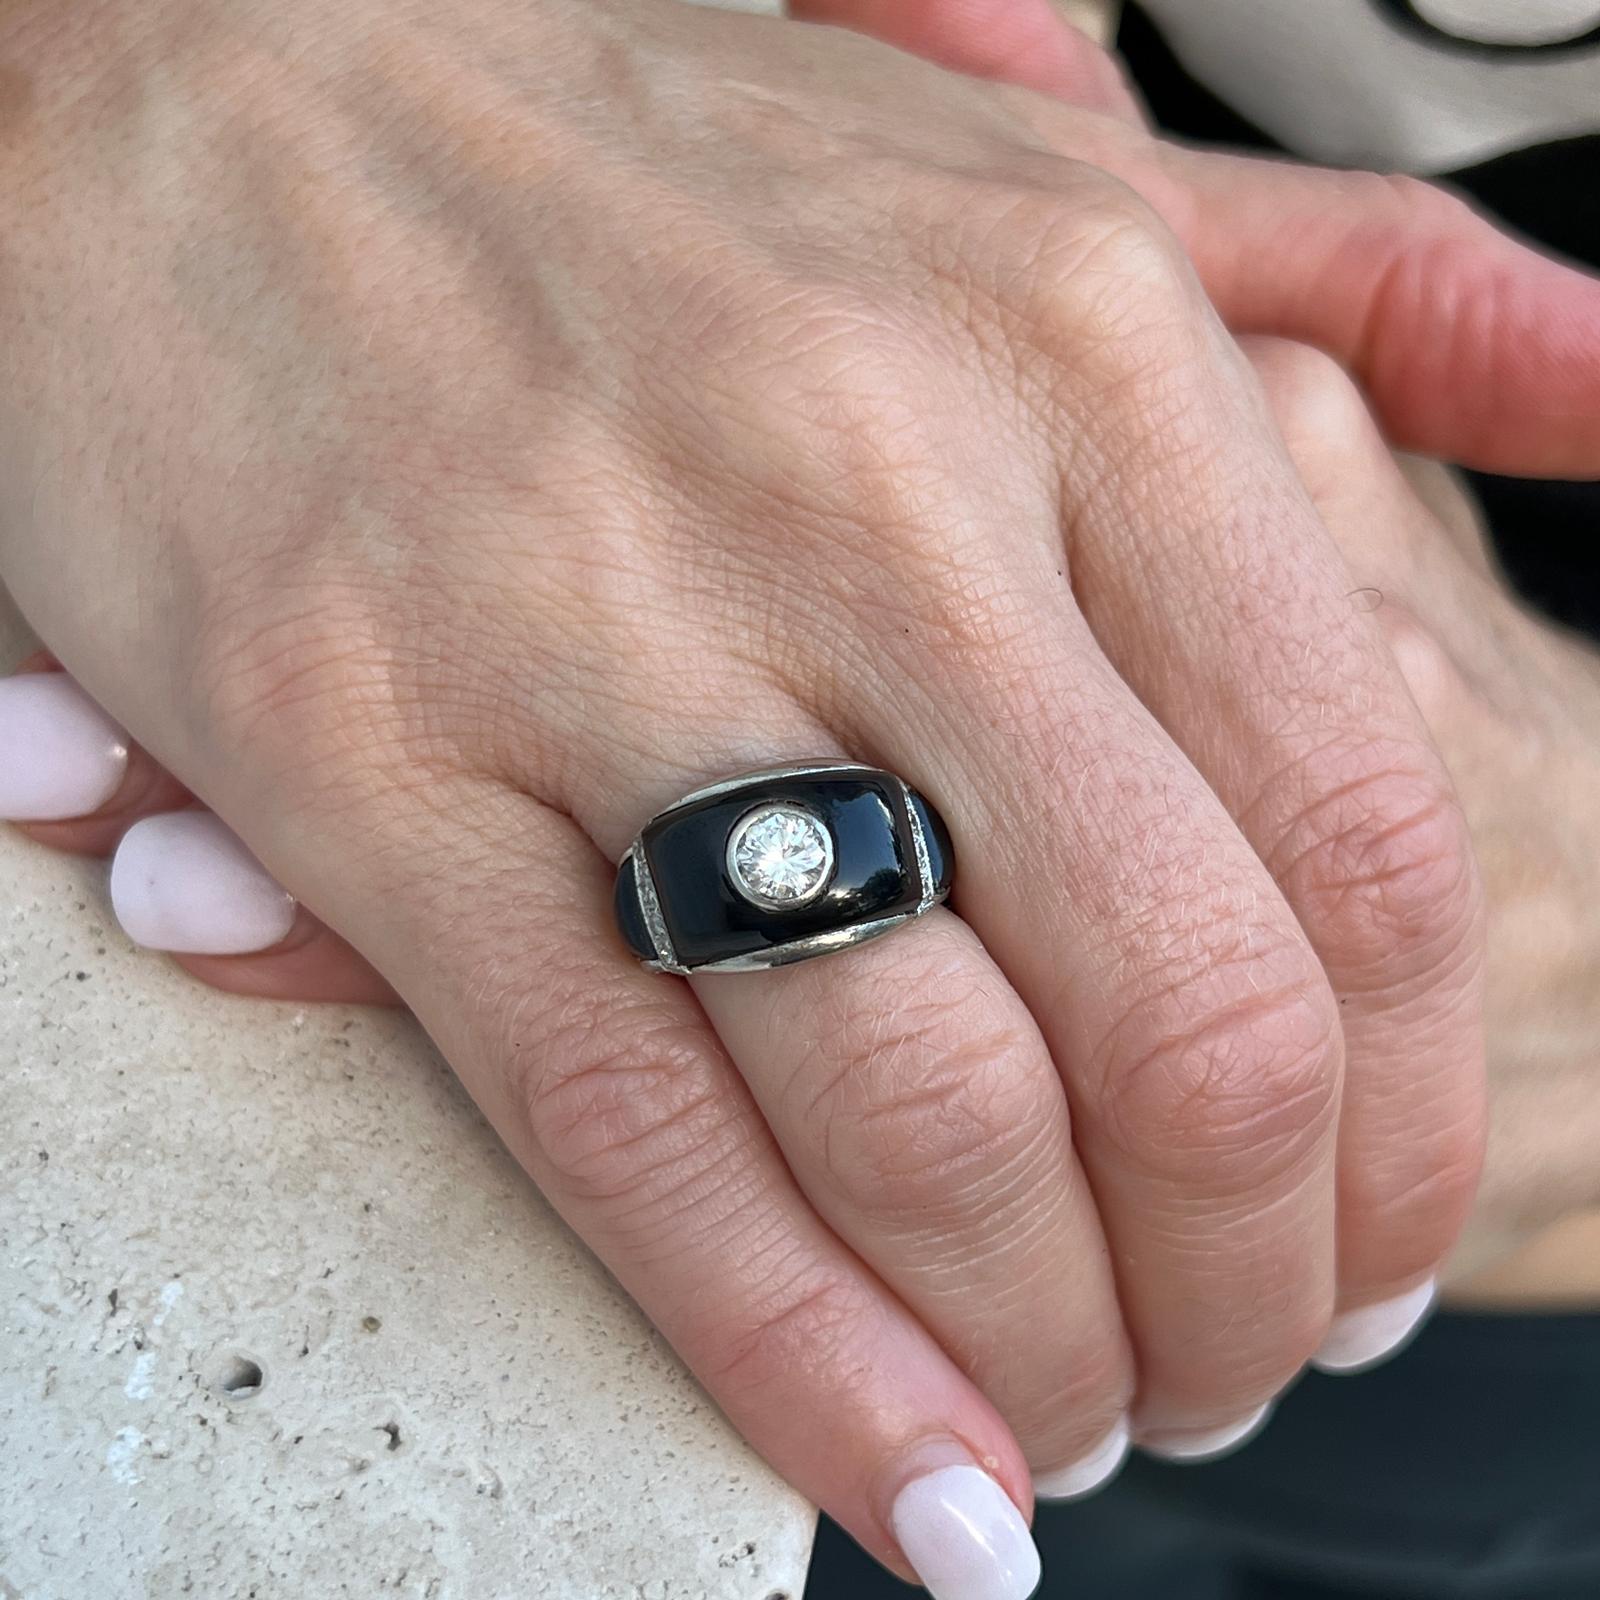 Beautiful Art Deco diamond and onyx cocktail ring handcrafted in platinum. The ring features a bezel set Old European cut diamond weighing approximately .60 carats, and another 8 side diamonds weighing another .12 carats. The diamonds are graded F-G